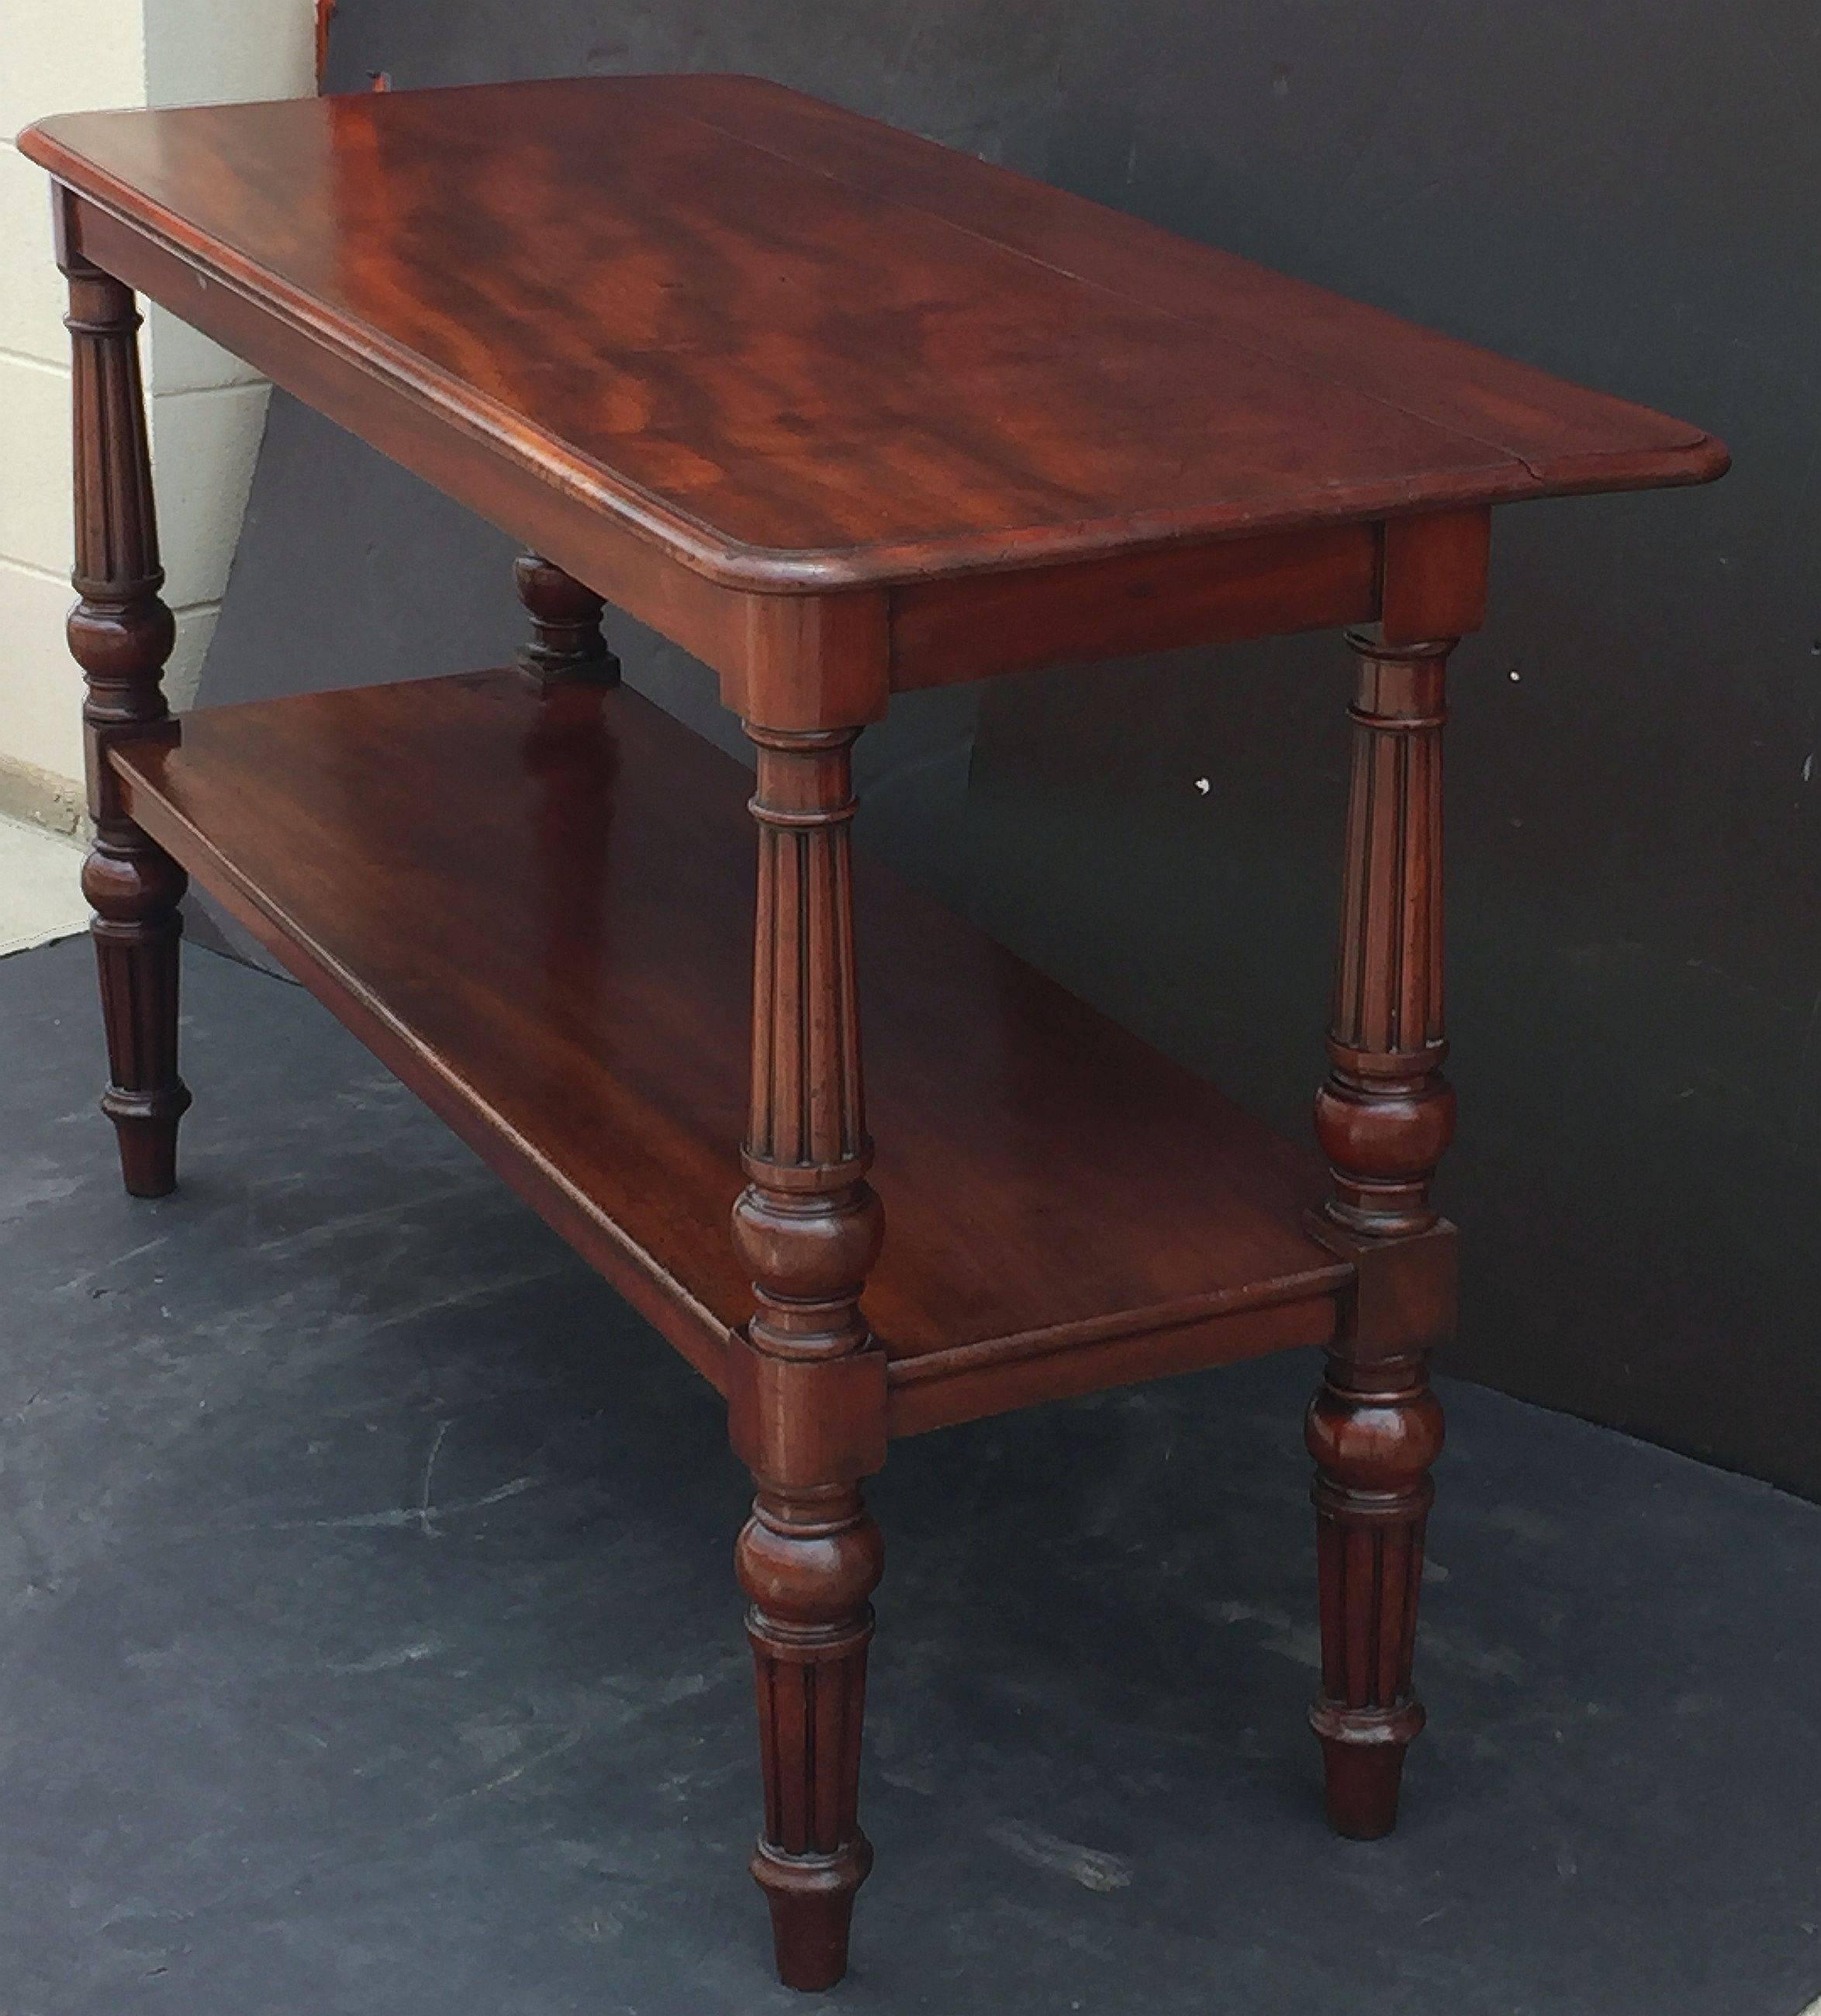 A fine English console server or buffet trolley table of flame mahogany from the William IV era, featuring a moulded rectangular top with extension or leaf to the back, allowing for extra depth. Set upon a frieze of four handsomely turned column